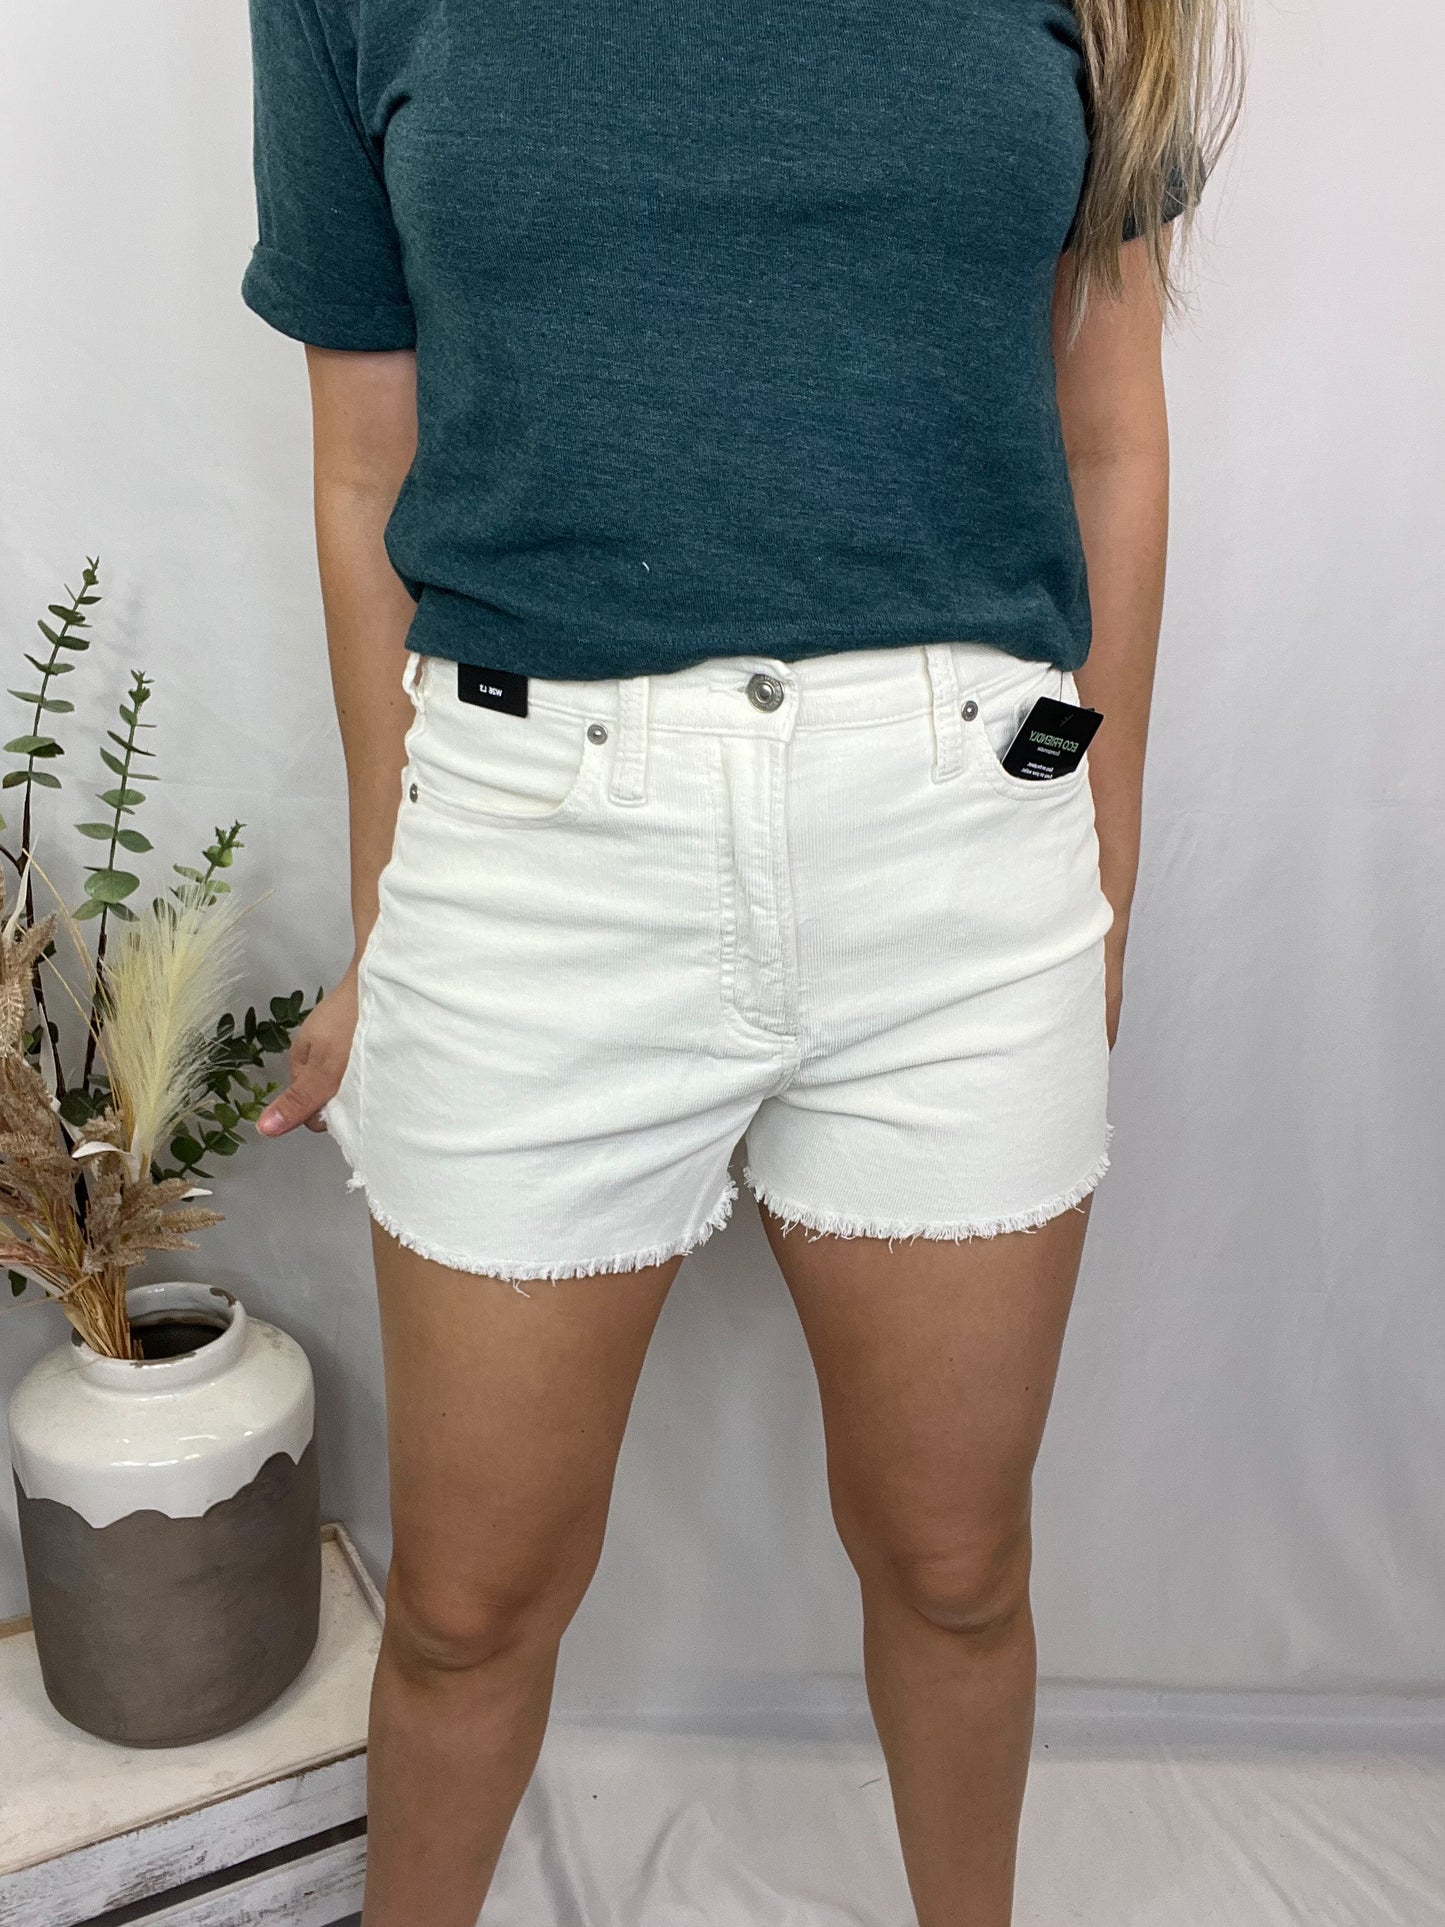 Highly Desirable Shorts